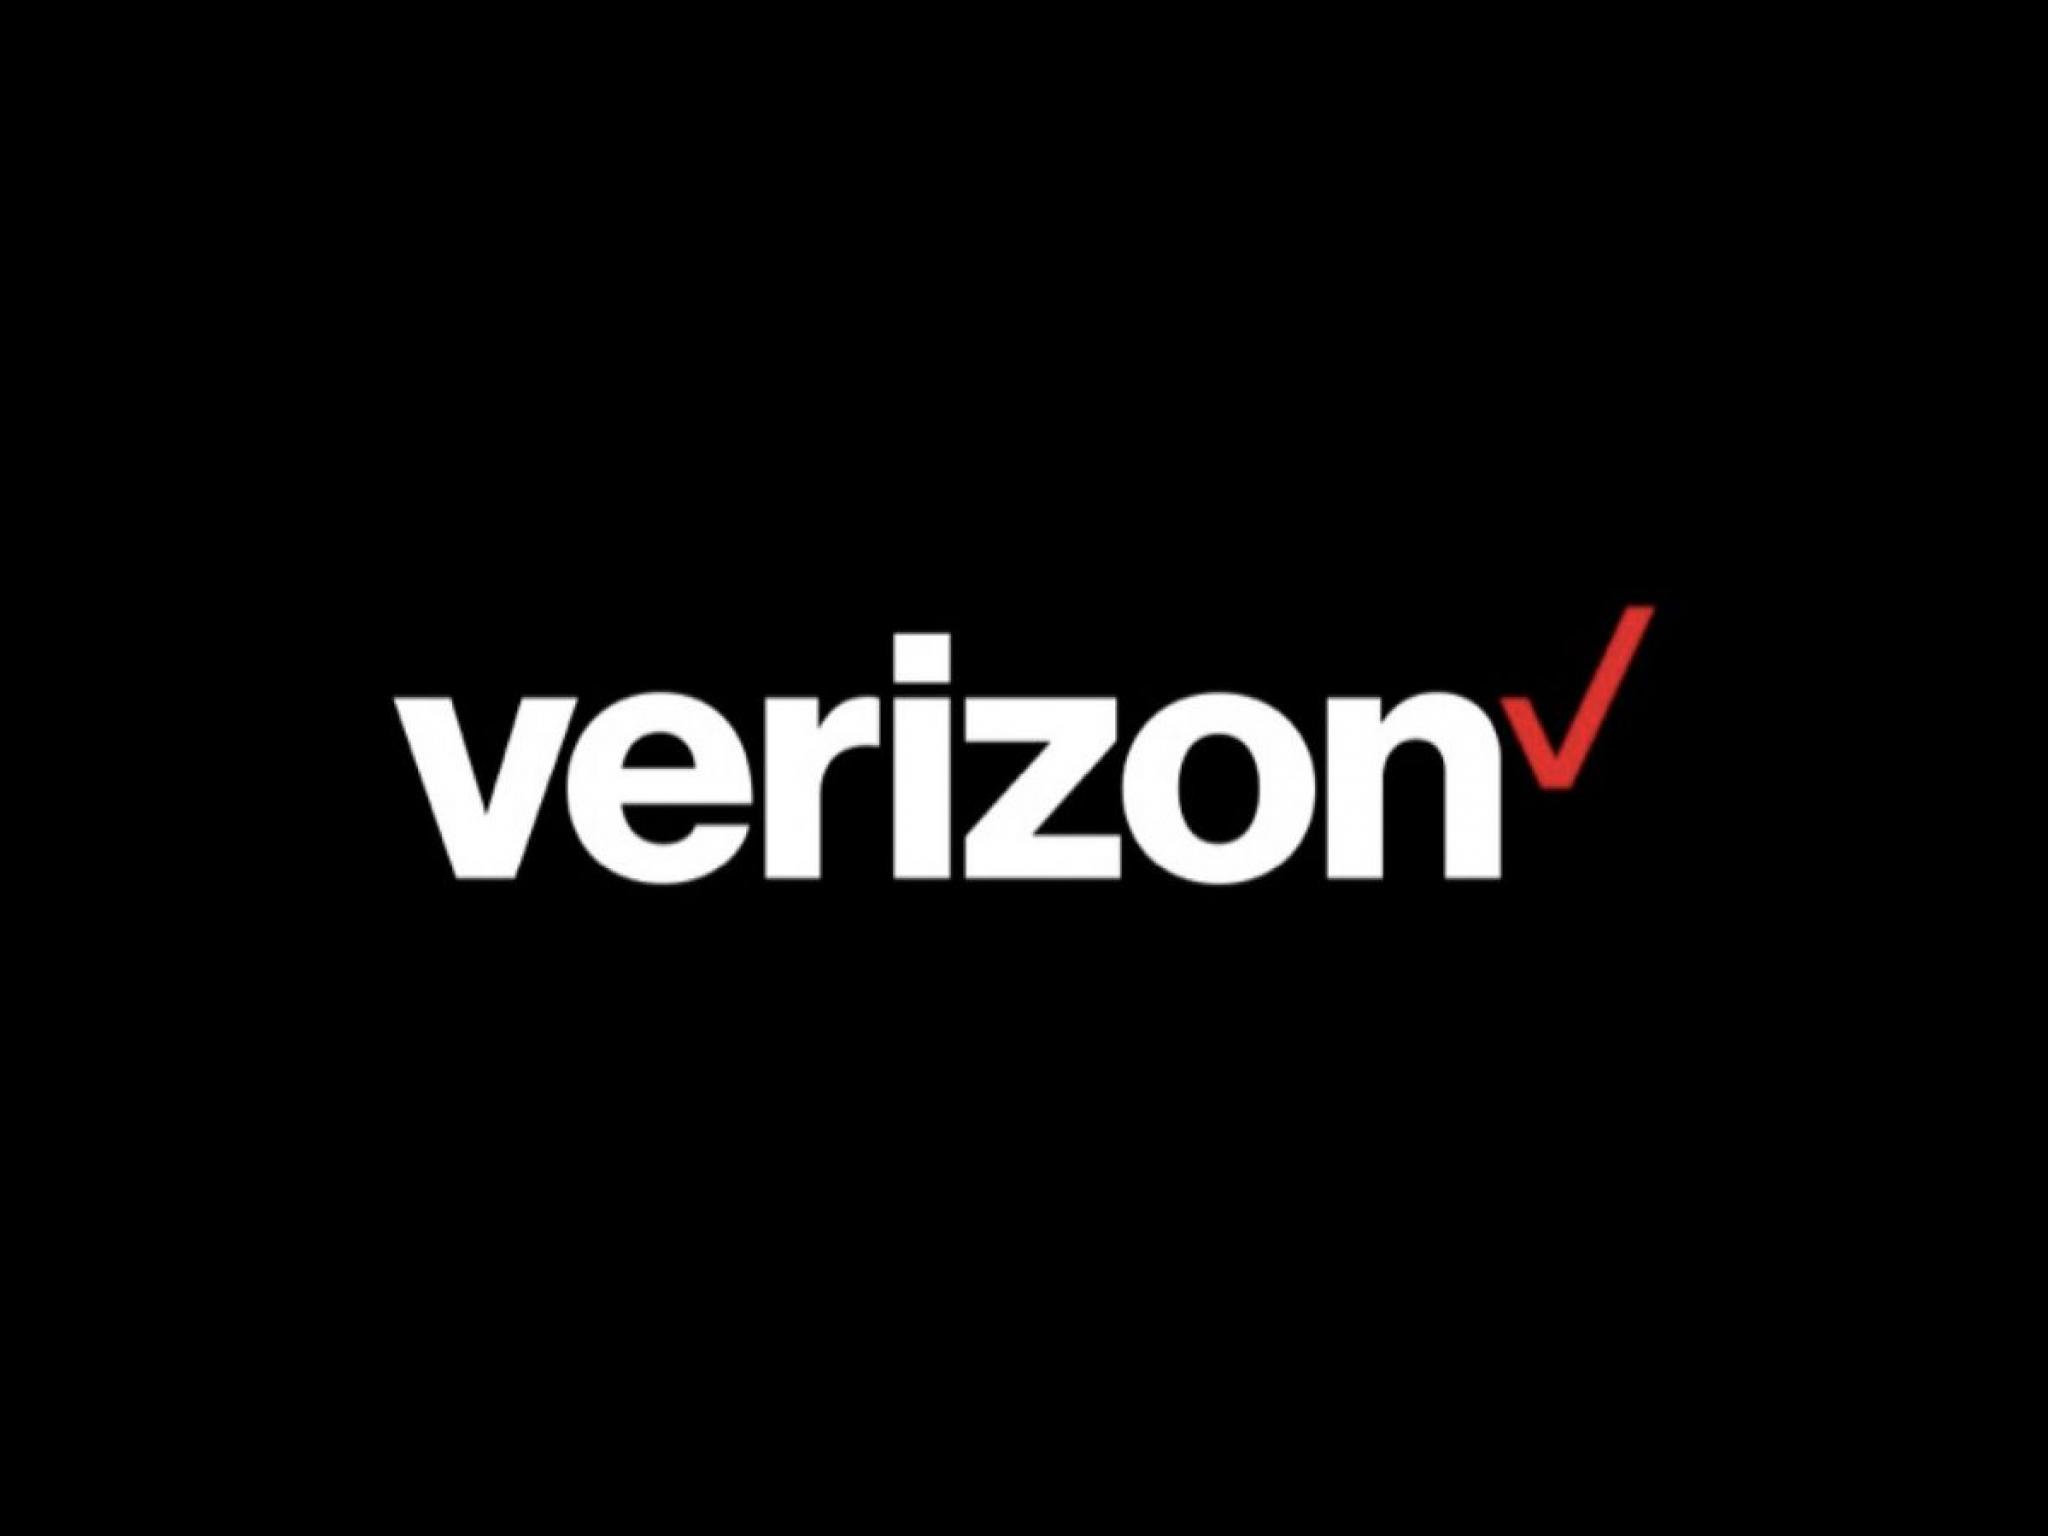  verizon-posts-upbeat-earnings-joins-rtx-procter--gamble-and-other-big-stocks-moving-higher-on-tuesday 